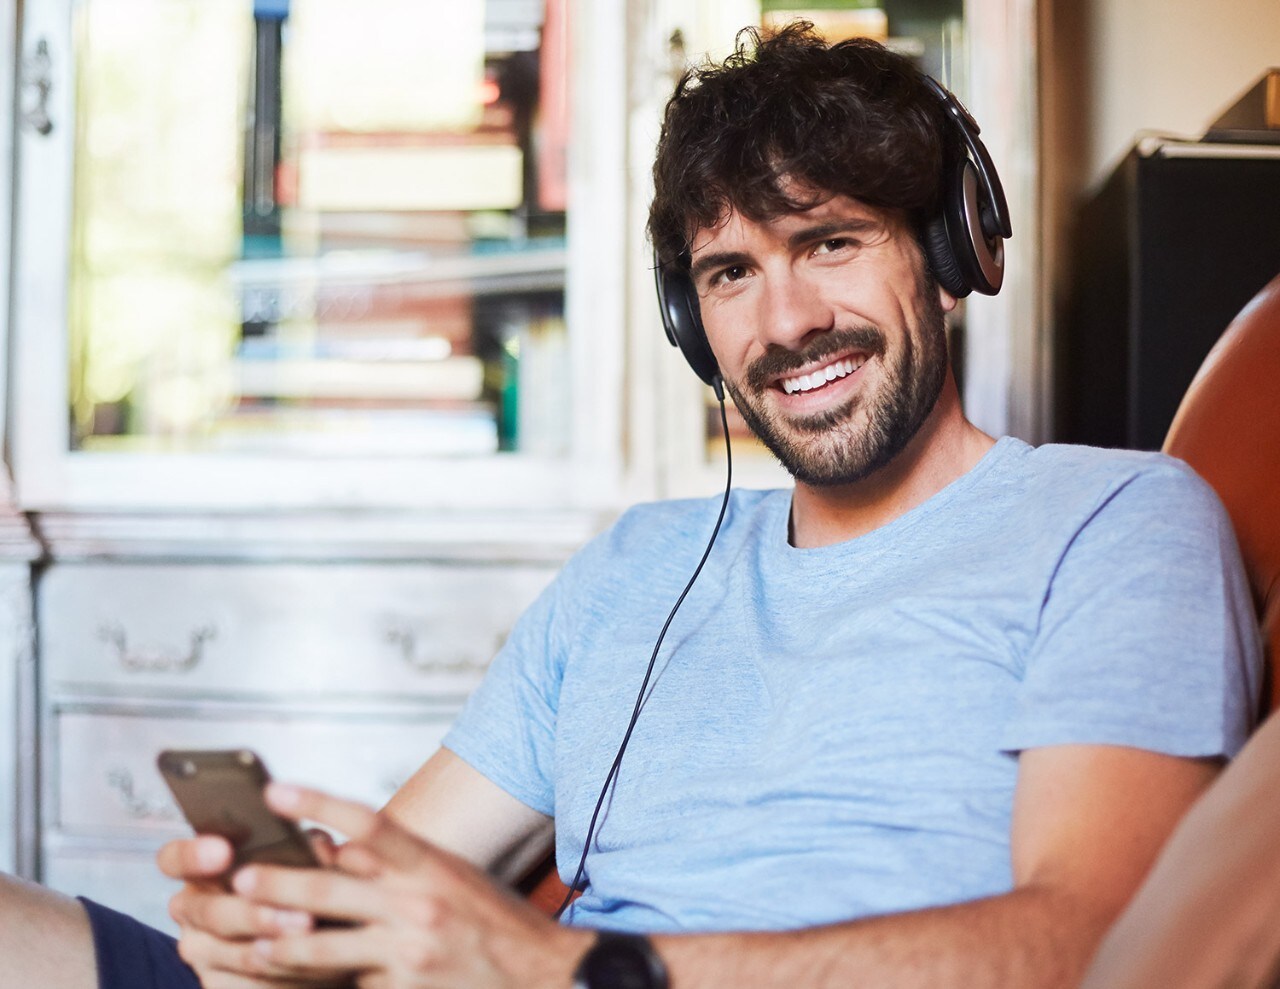 Man with beard wearing t-shirt holding phone with headphones